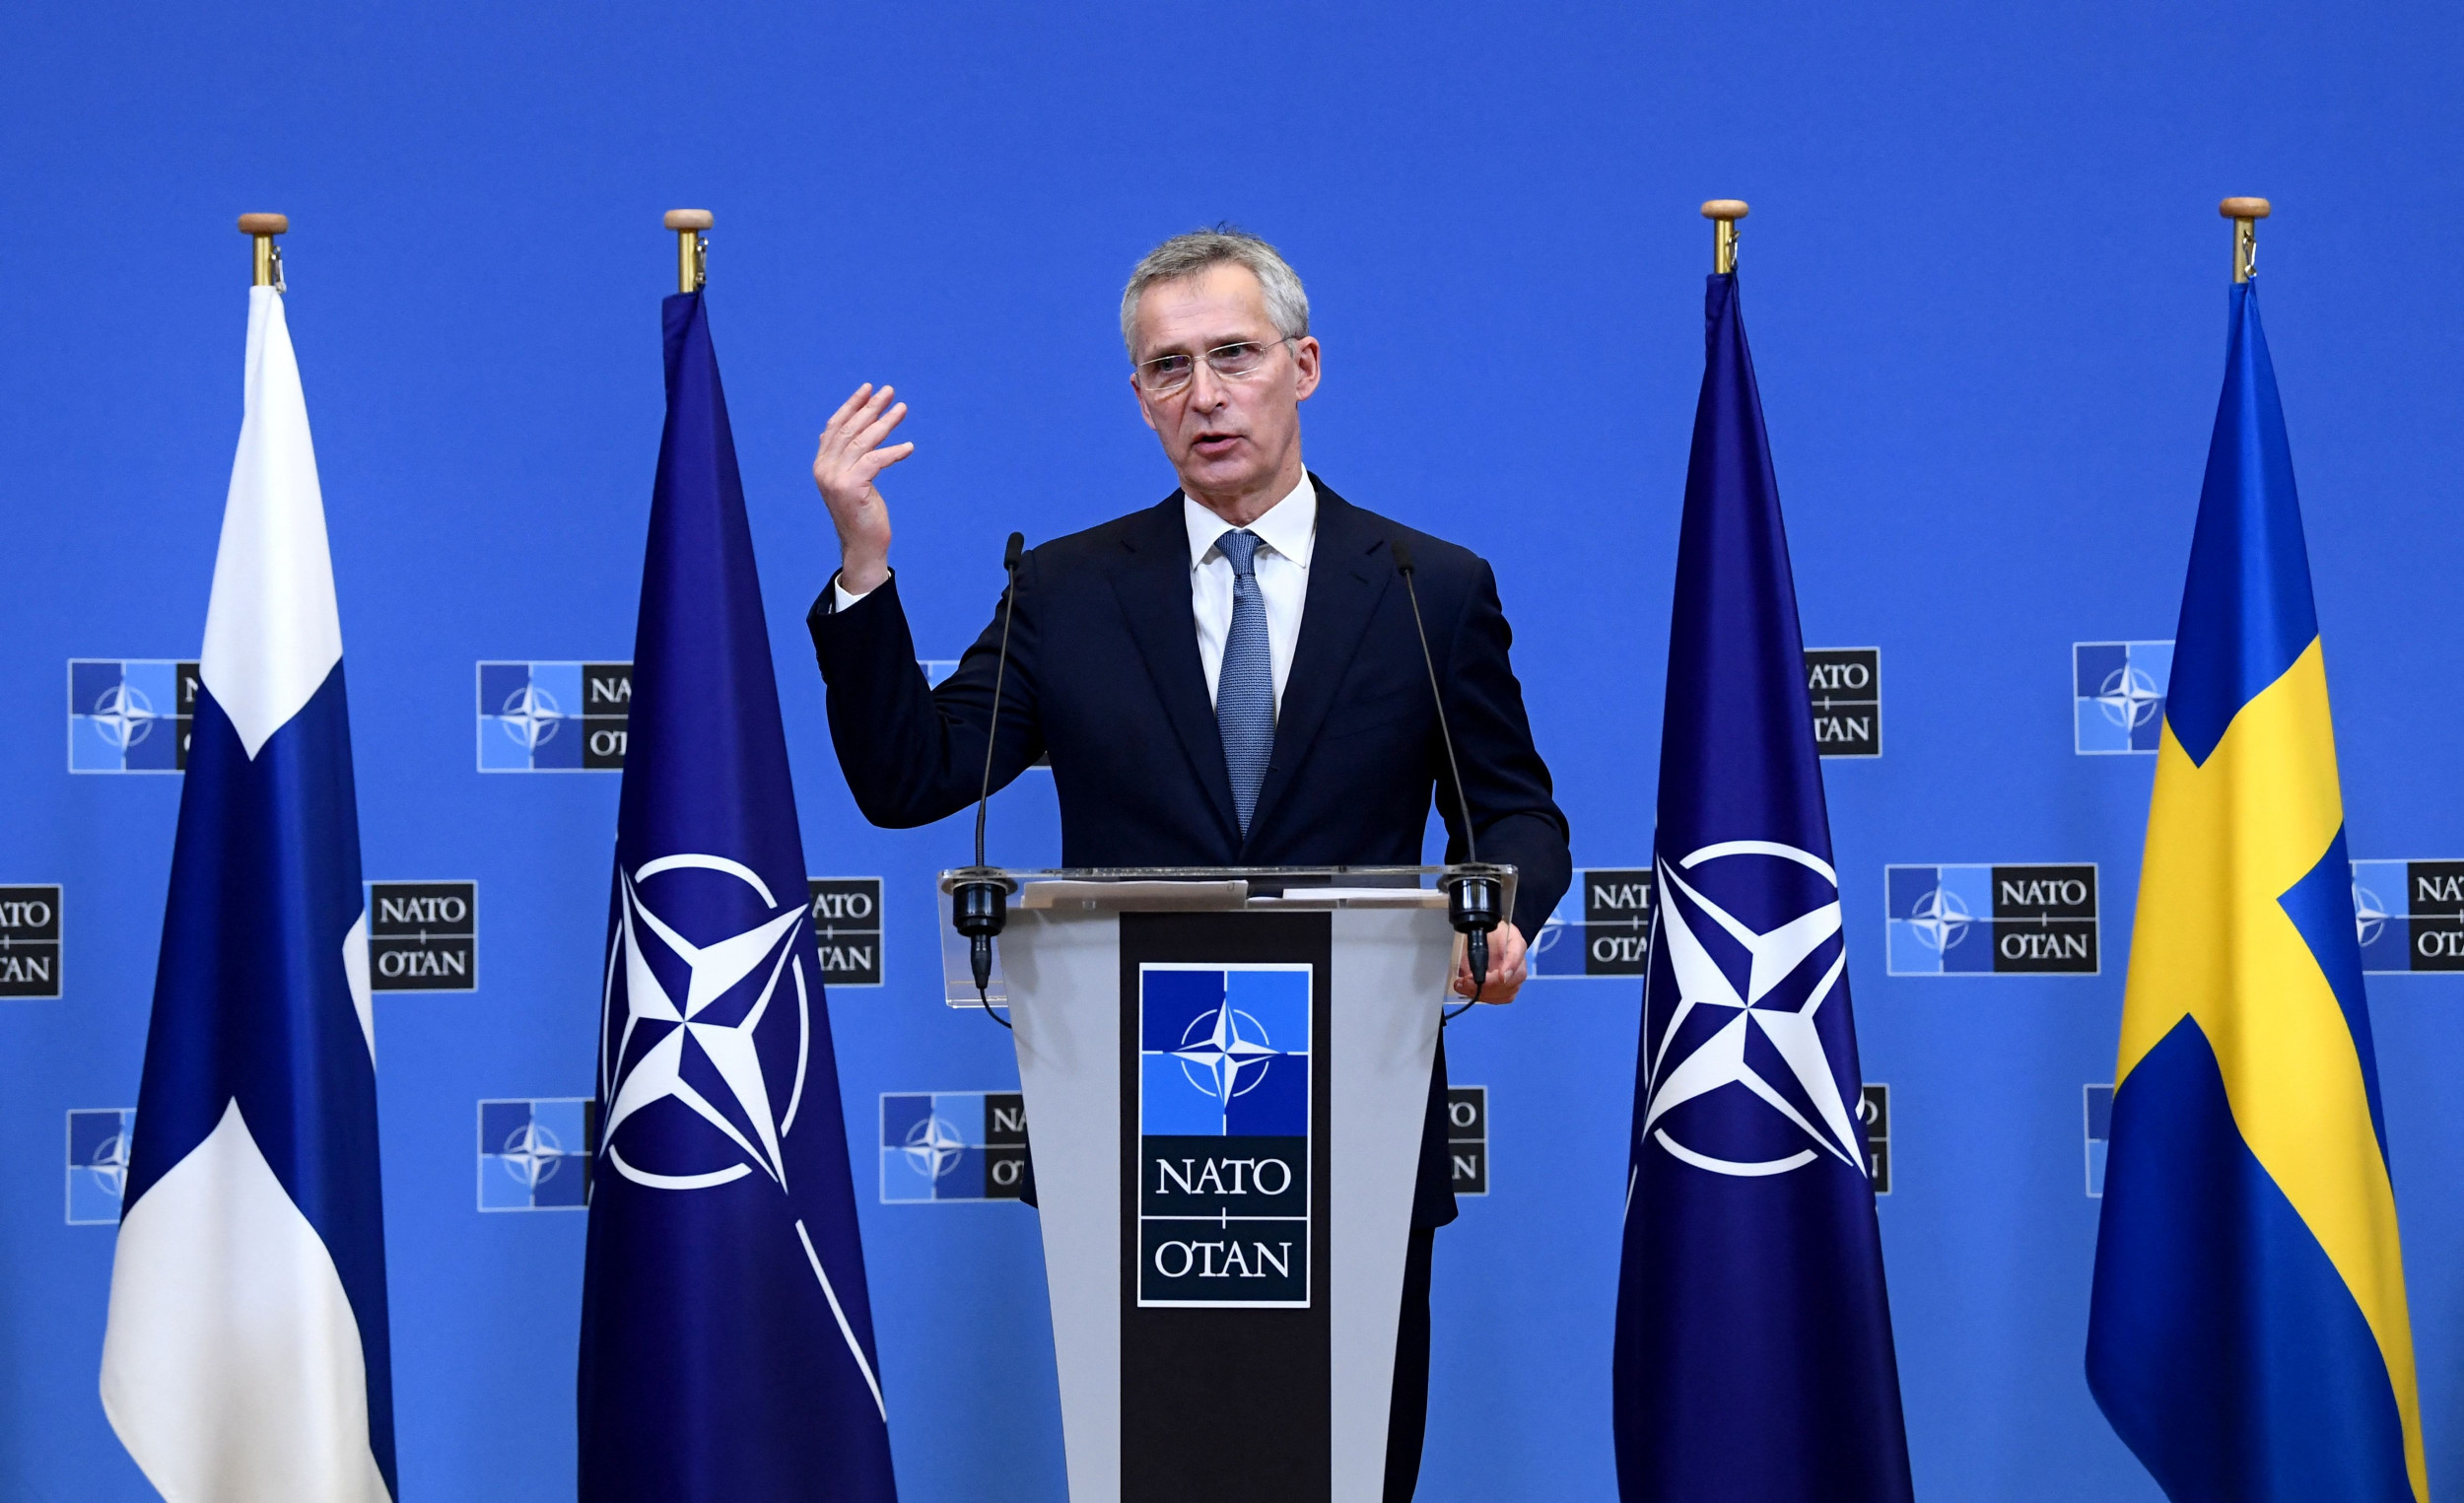 Finland and Sweden confirm the intention to join NATO